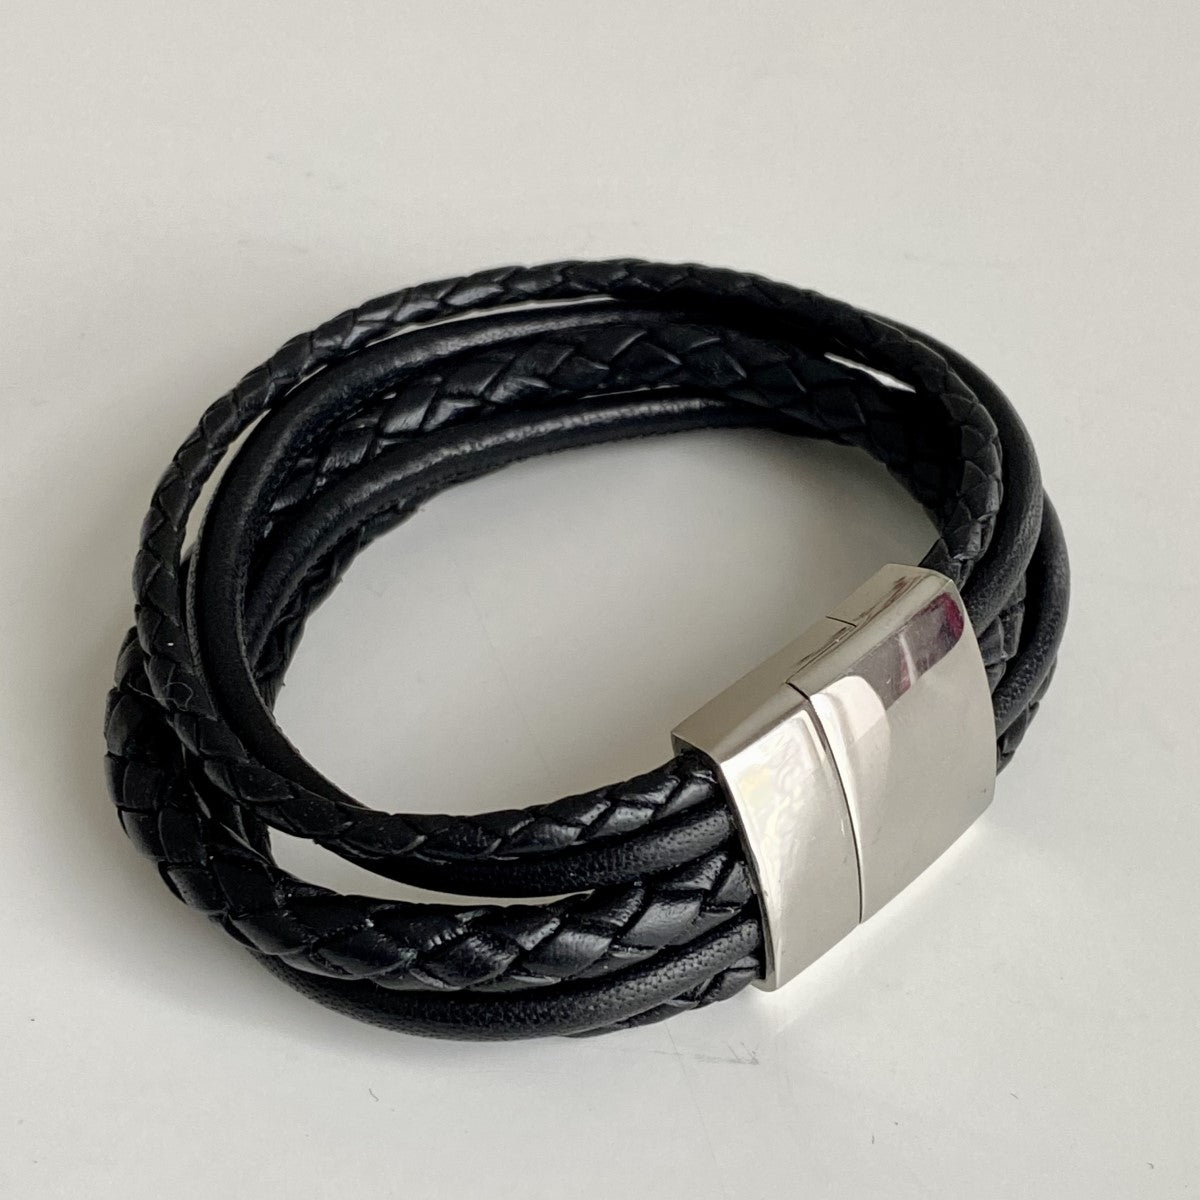 Black Nappa Leather Men's 5 Band Bracelet with a Magnetic Stainless Steel Clasp